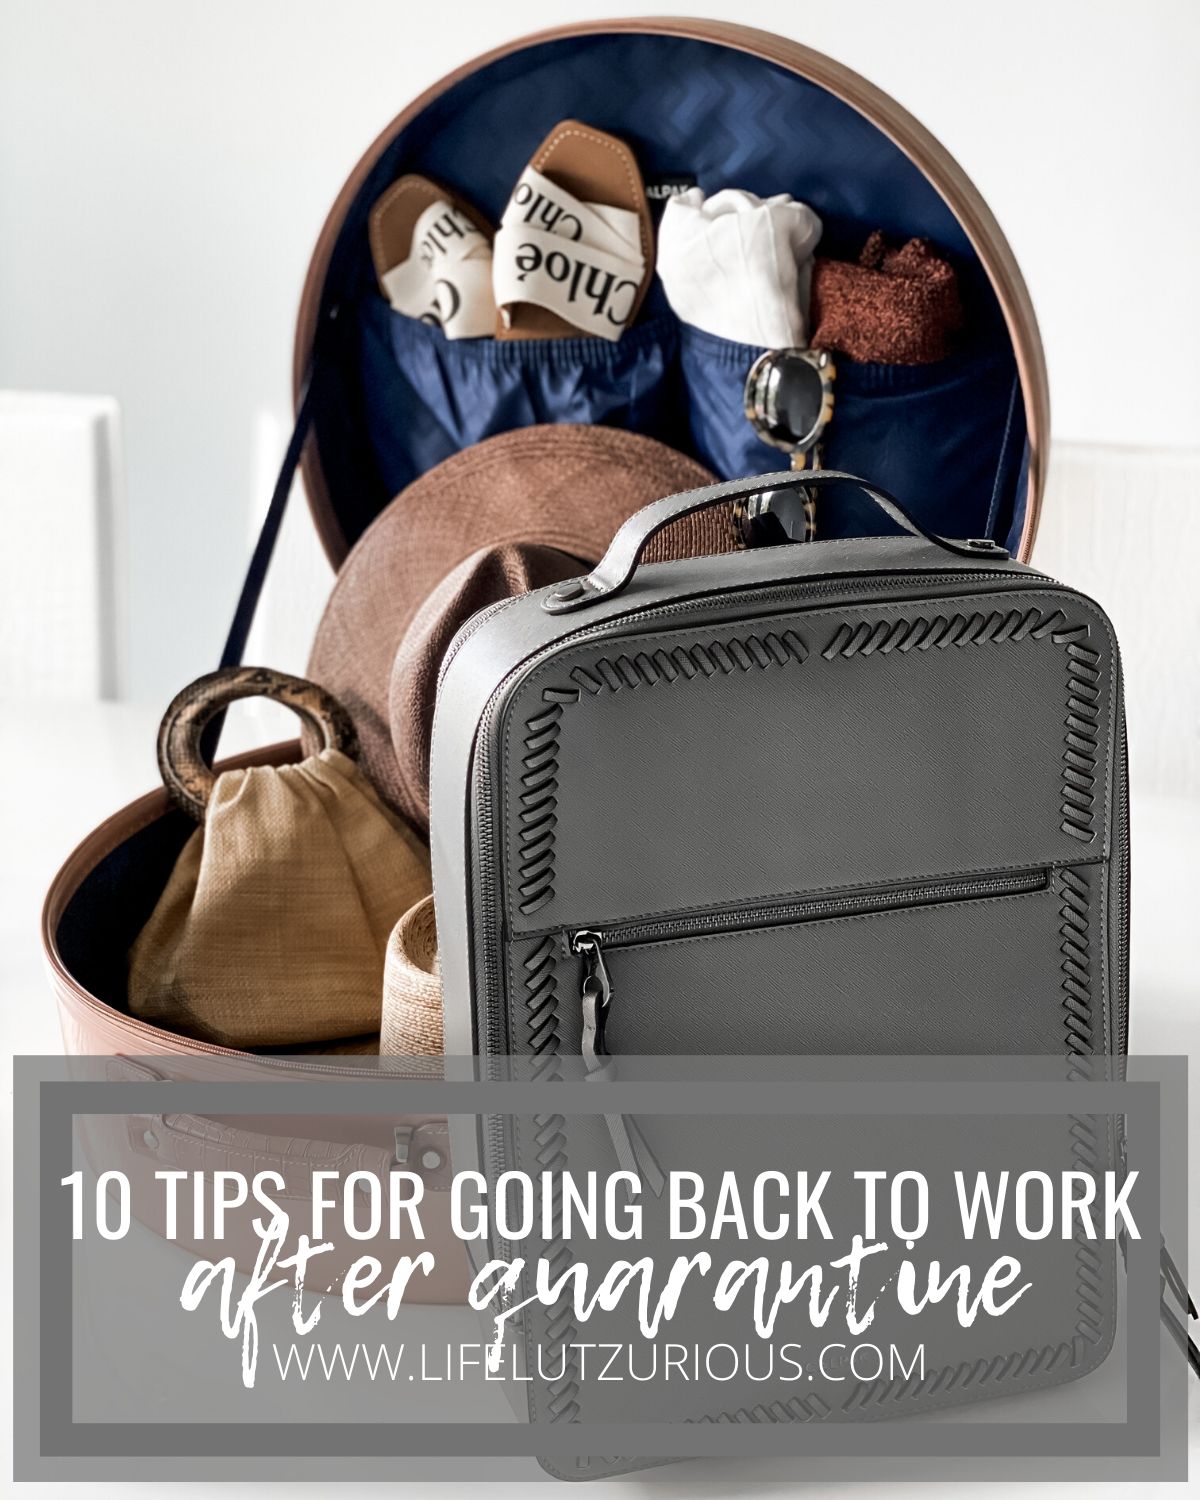 10 TIPS FOR GOING BACK TO WORK AFTER QUARANTINE - Life Lutzurious; Click here to learn the best tips for going back to work after quarantine on Life Lutzurious! Learn what to do when going back to work after lockdown and for first day back to work after lockdown. Finally you are welcome back to work so make the best of it! Get work clothes women and work outfits women office professional. Get your own briefcase women business outfit. Purses and handbags are the best too! Best french women style handbags for the office. 